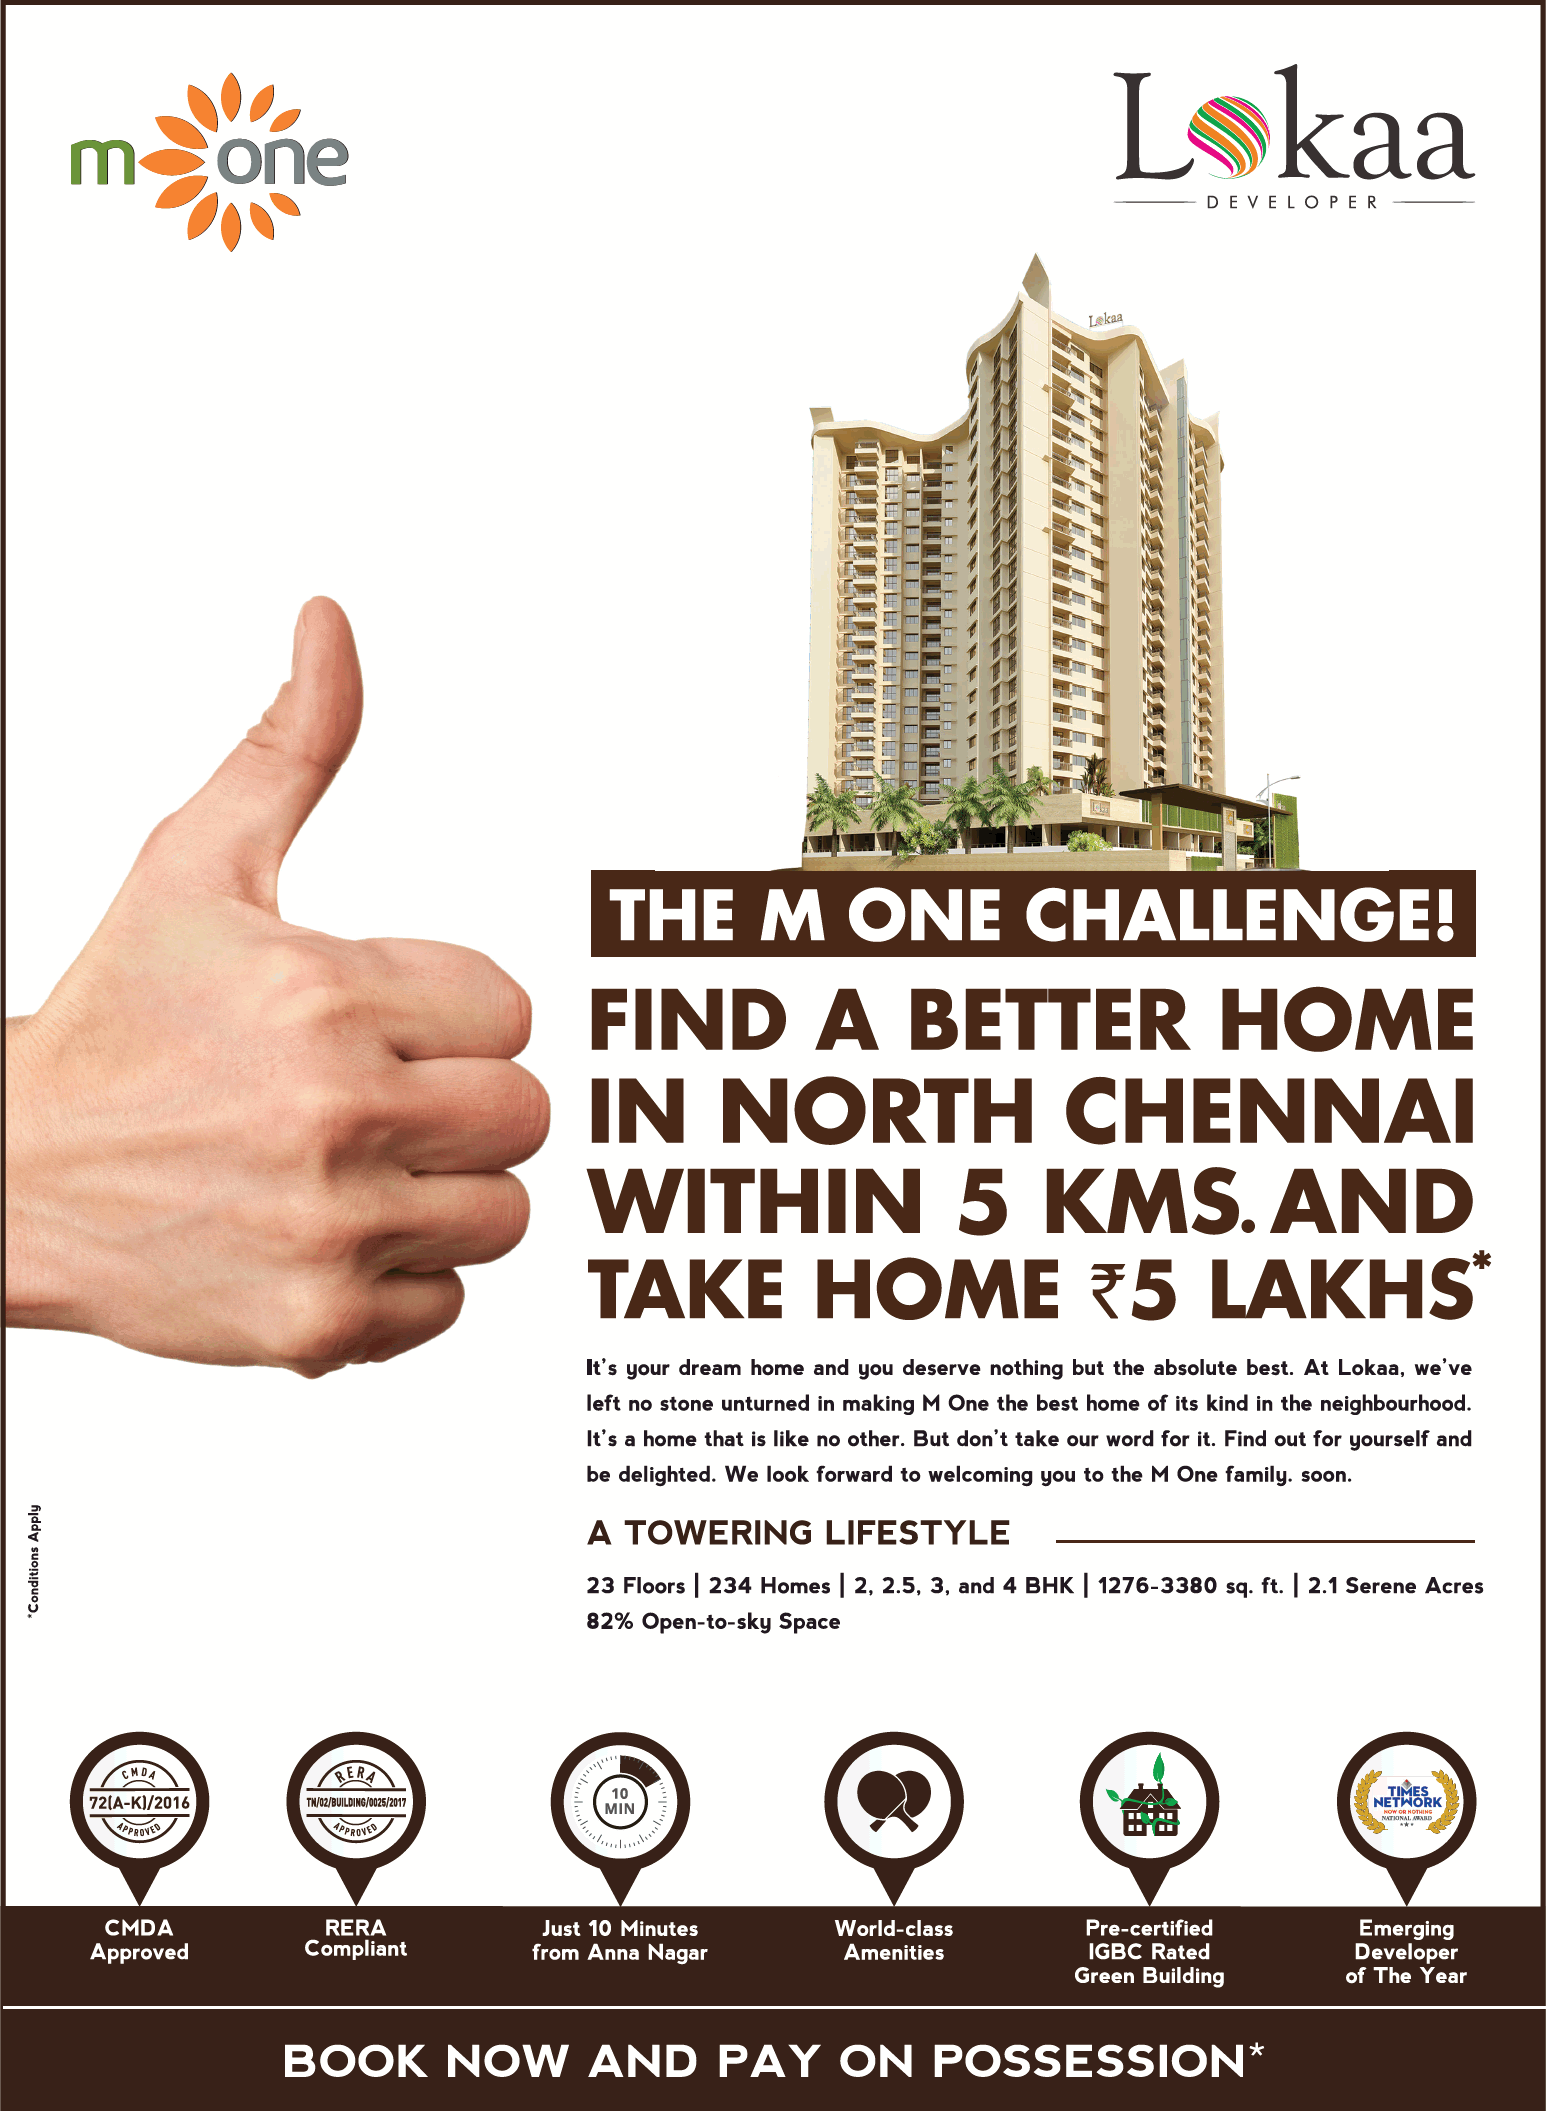 Book homes at Rs. 5 lakhs at Lokaa M One in Chennai Update